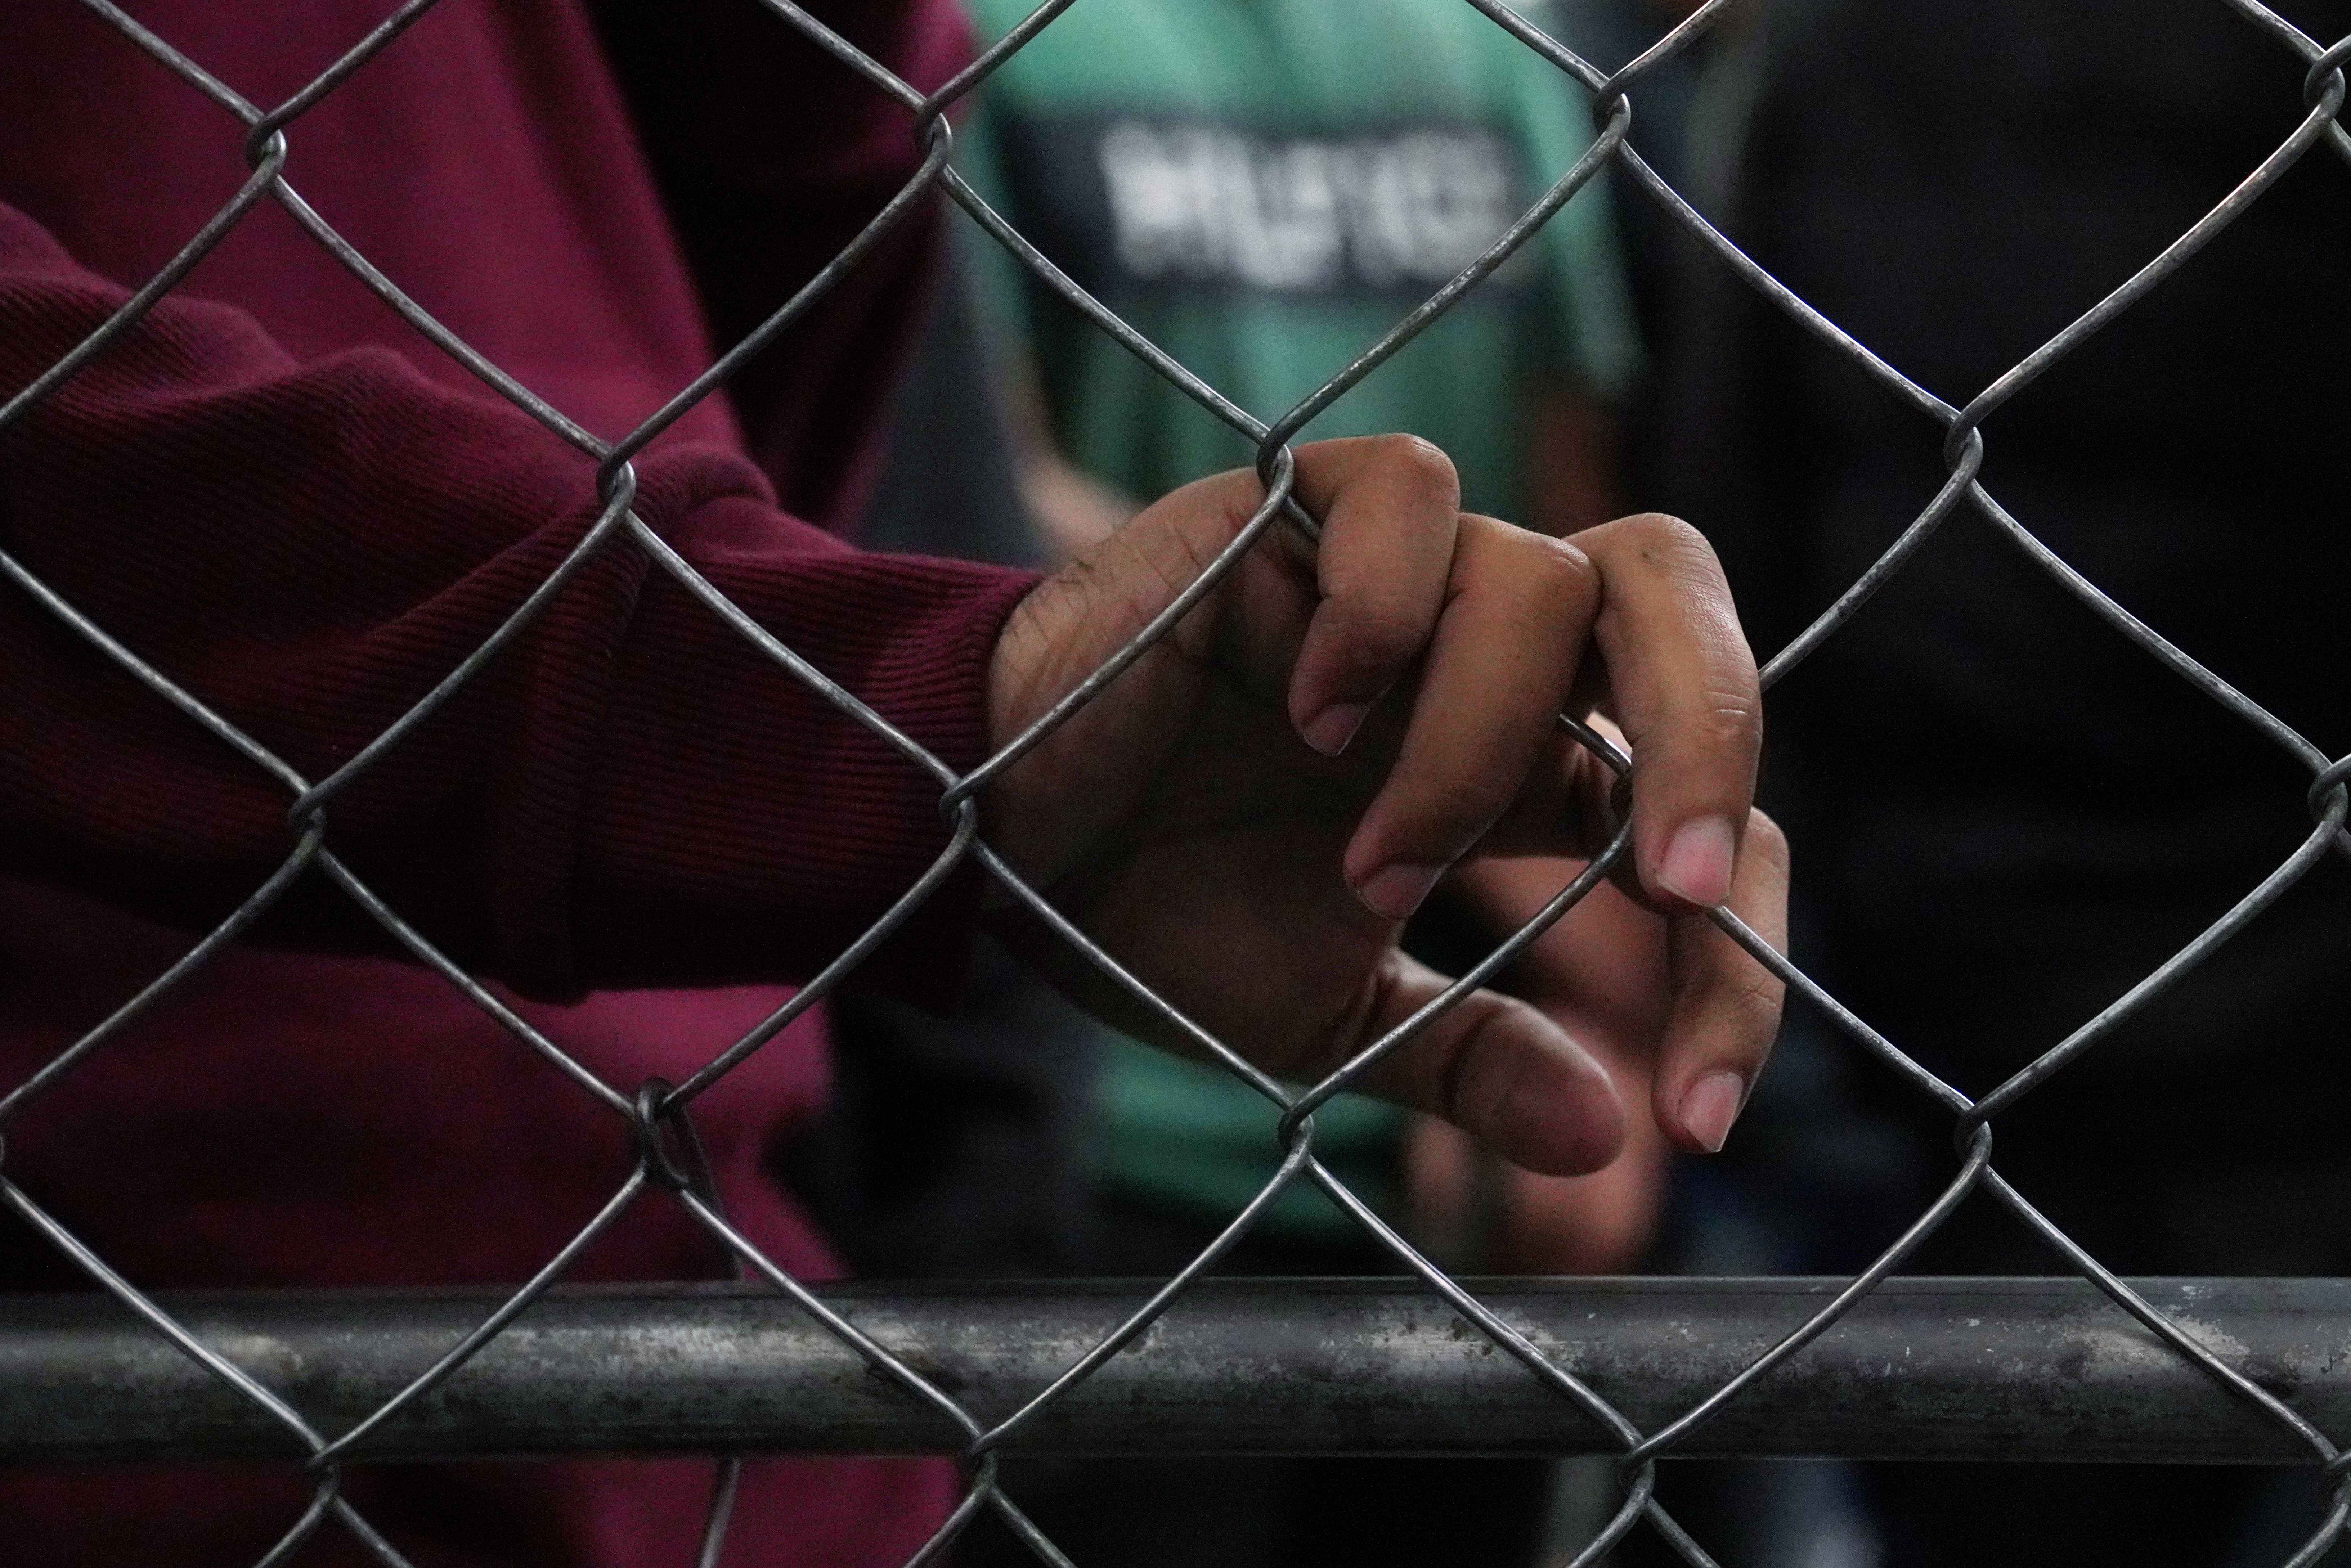 Single-adult male detainees wait along a fence inside a Border Patrol station in McAllen, Texas